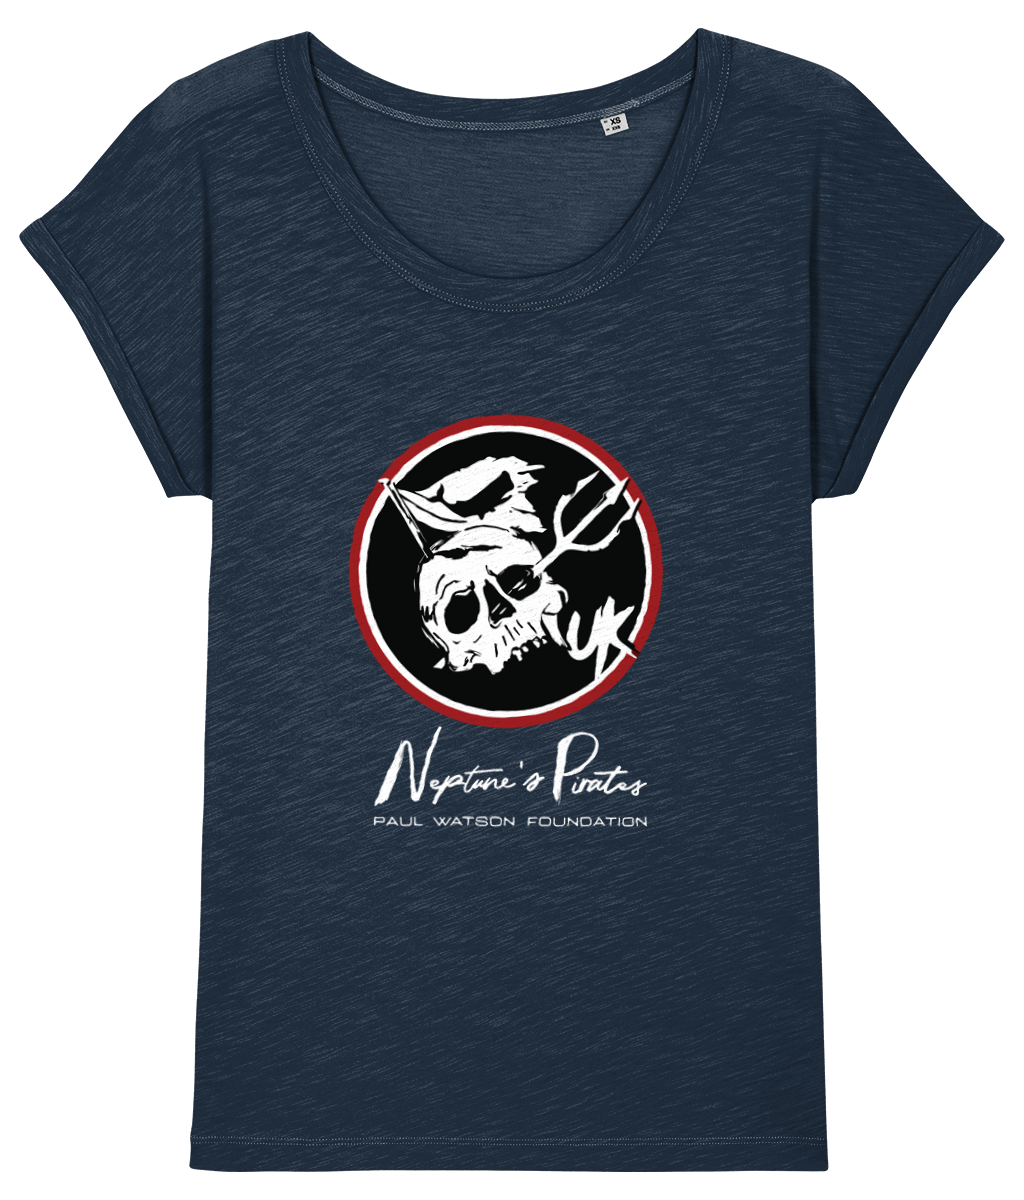 Neptune's Pirates Women's Rolled Sleeve T-Shirt - Captain Paul Watson Foundation (t/a Neptune's Pirates)